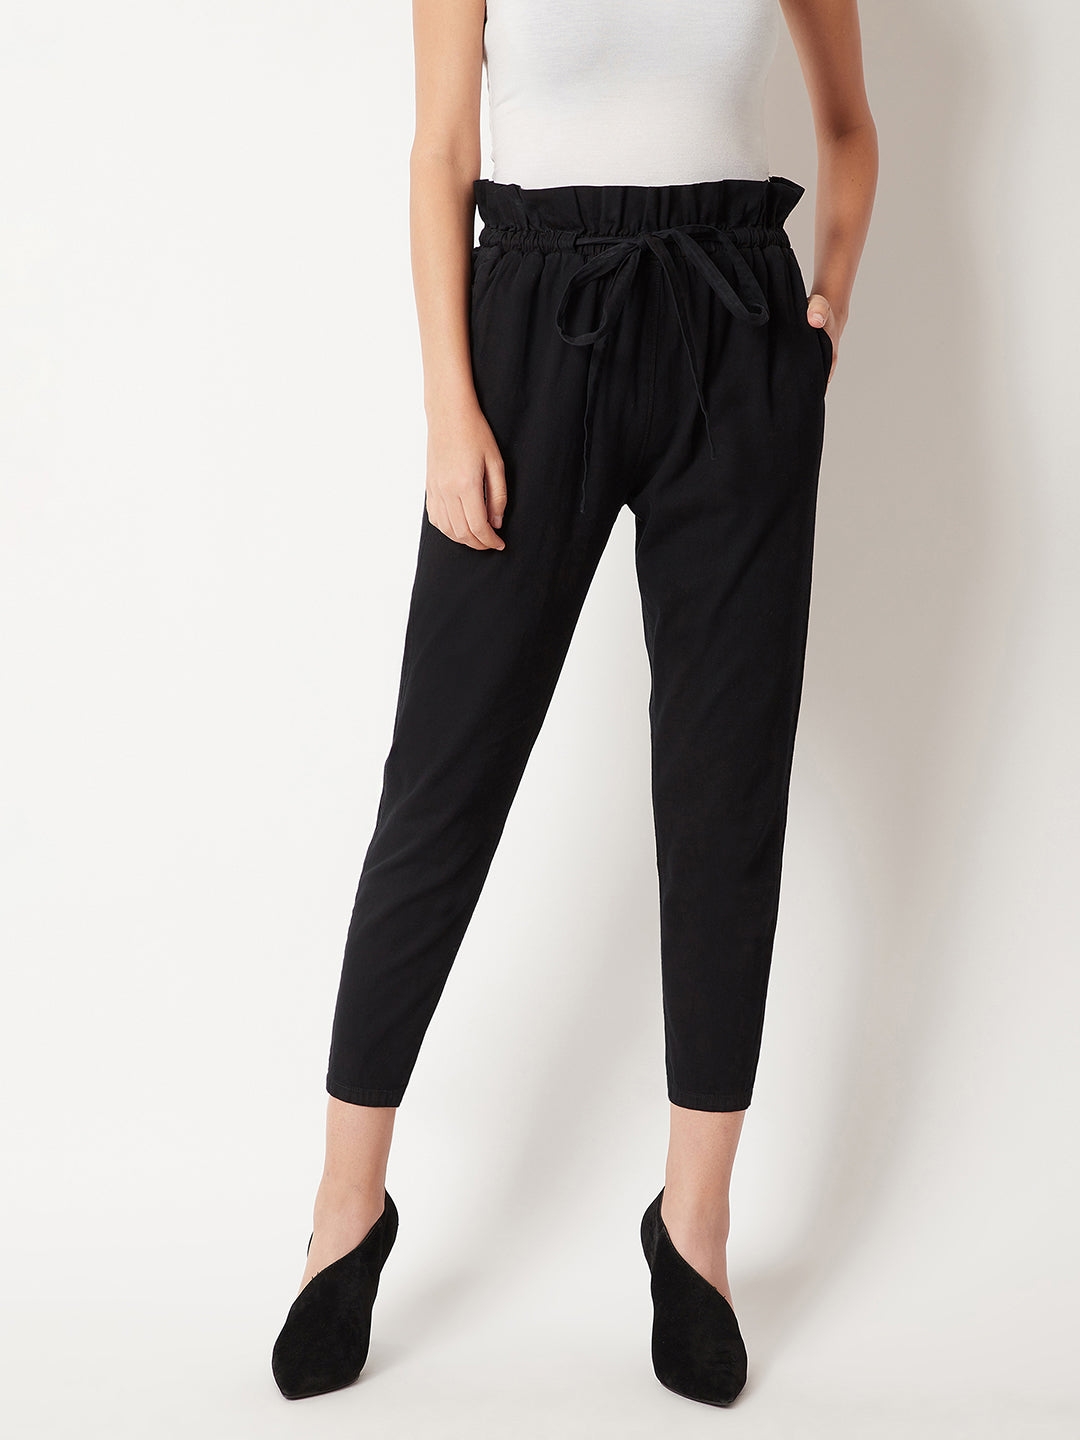 MISS CHASE | Black Pleated Front High Rise Clean Look Ankle length Stretchable Denim Paper Bag Pants